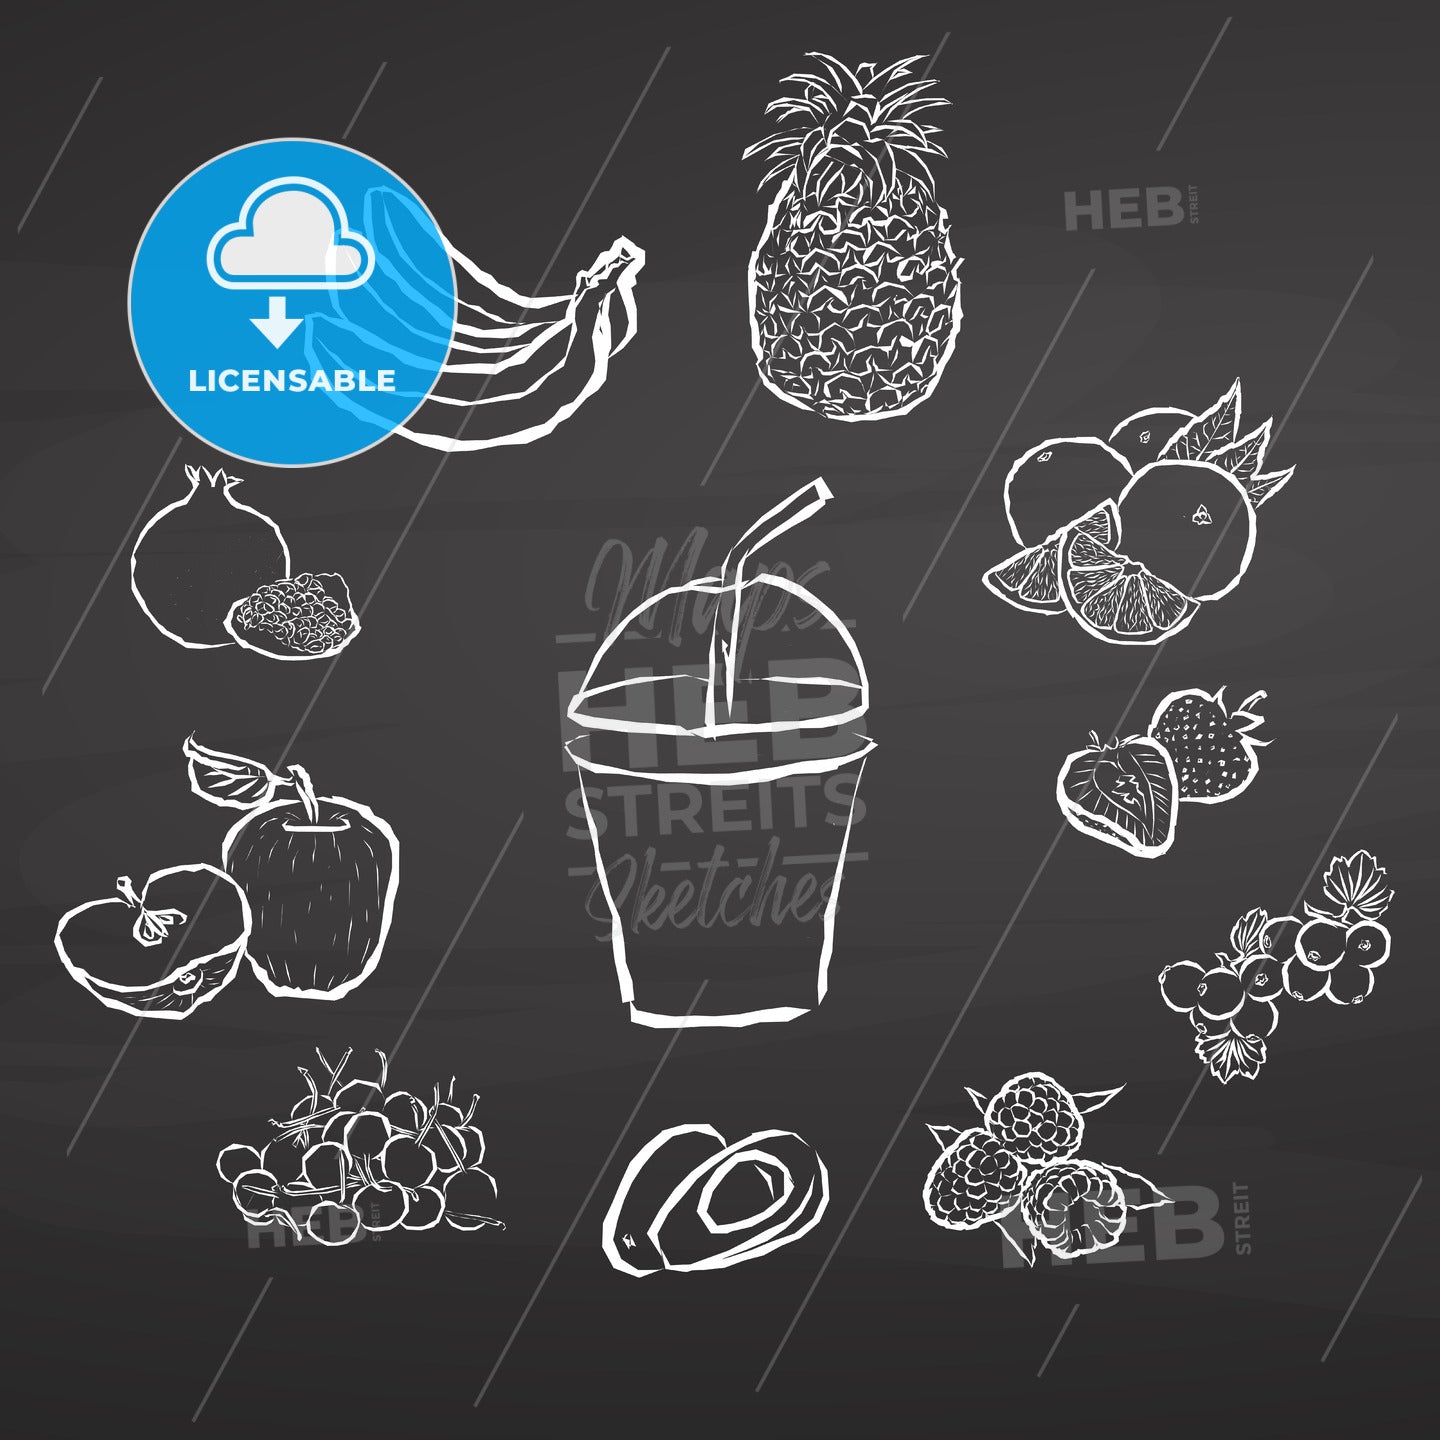 Smoothie and fruits. Illustration on chalkboard. – instant download